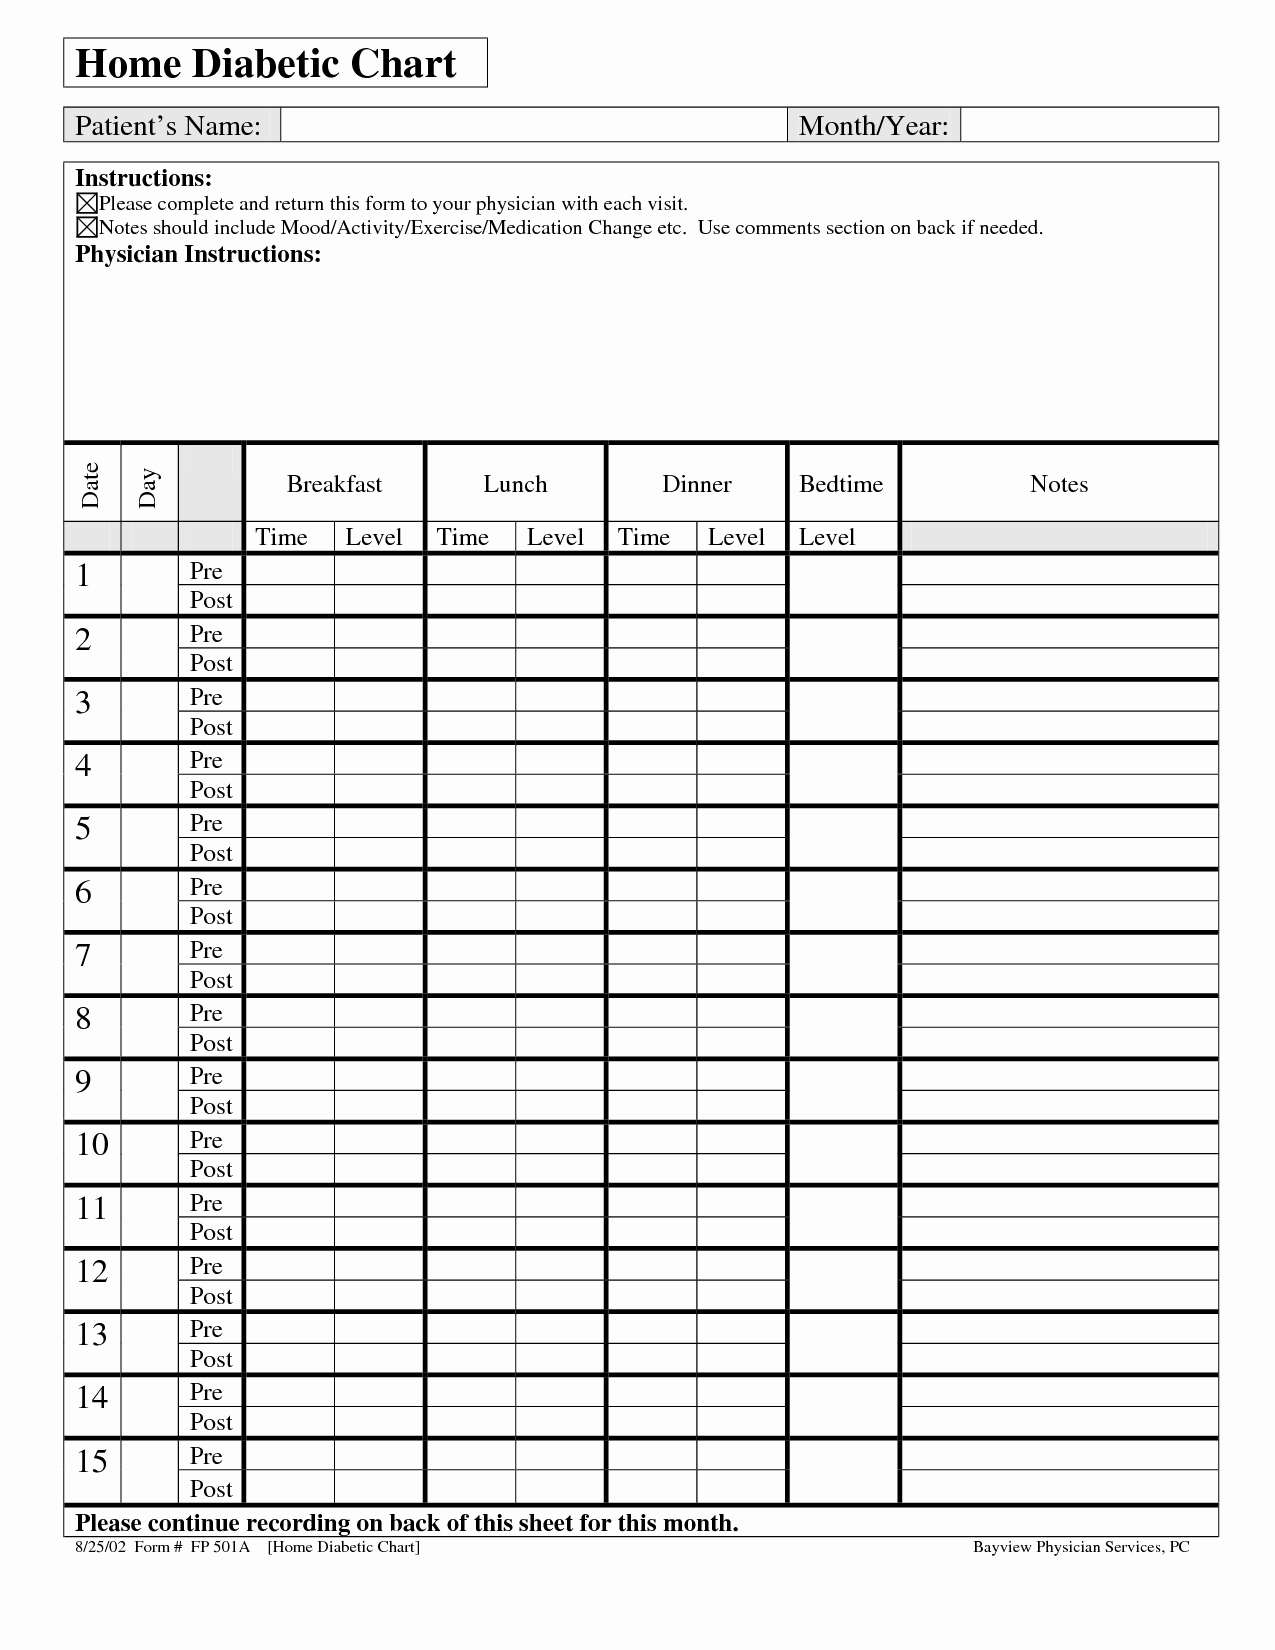 Diabetic Food Journal Template Awesome Insulin Log Template Home Diabetic Chart